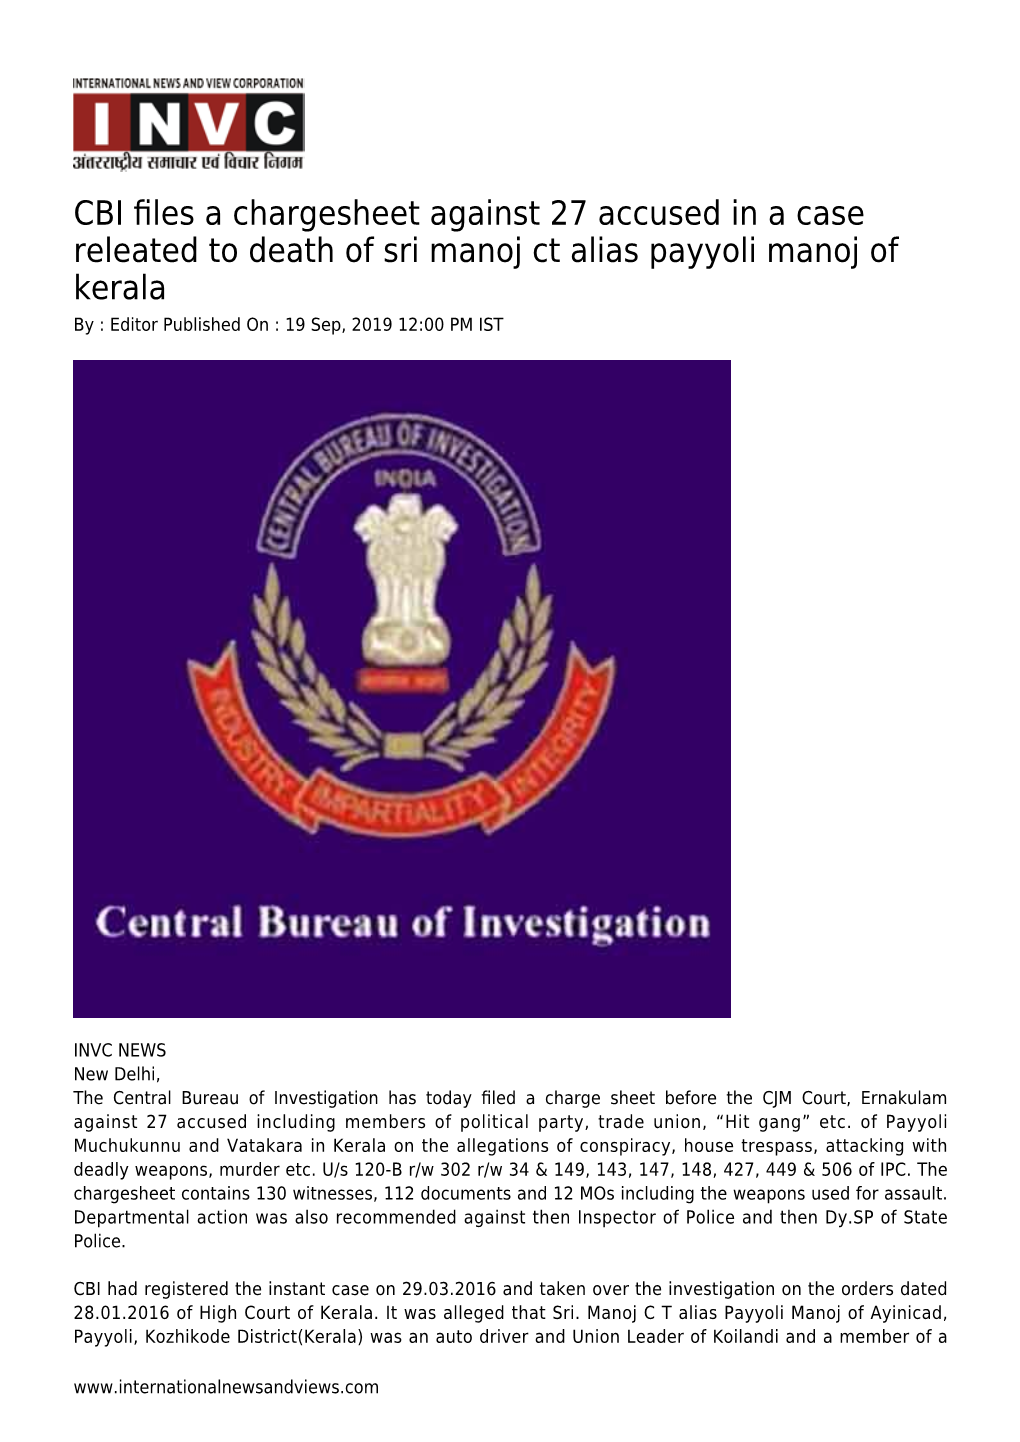 CBI Files a Chargesheet Against 27 Accused in a Case Releated to Death